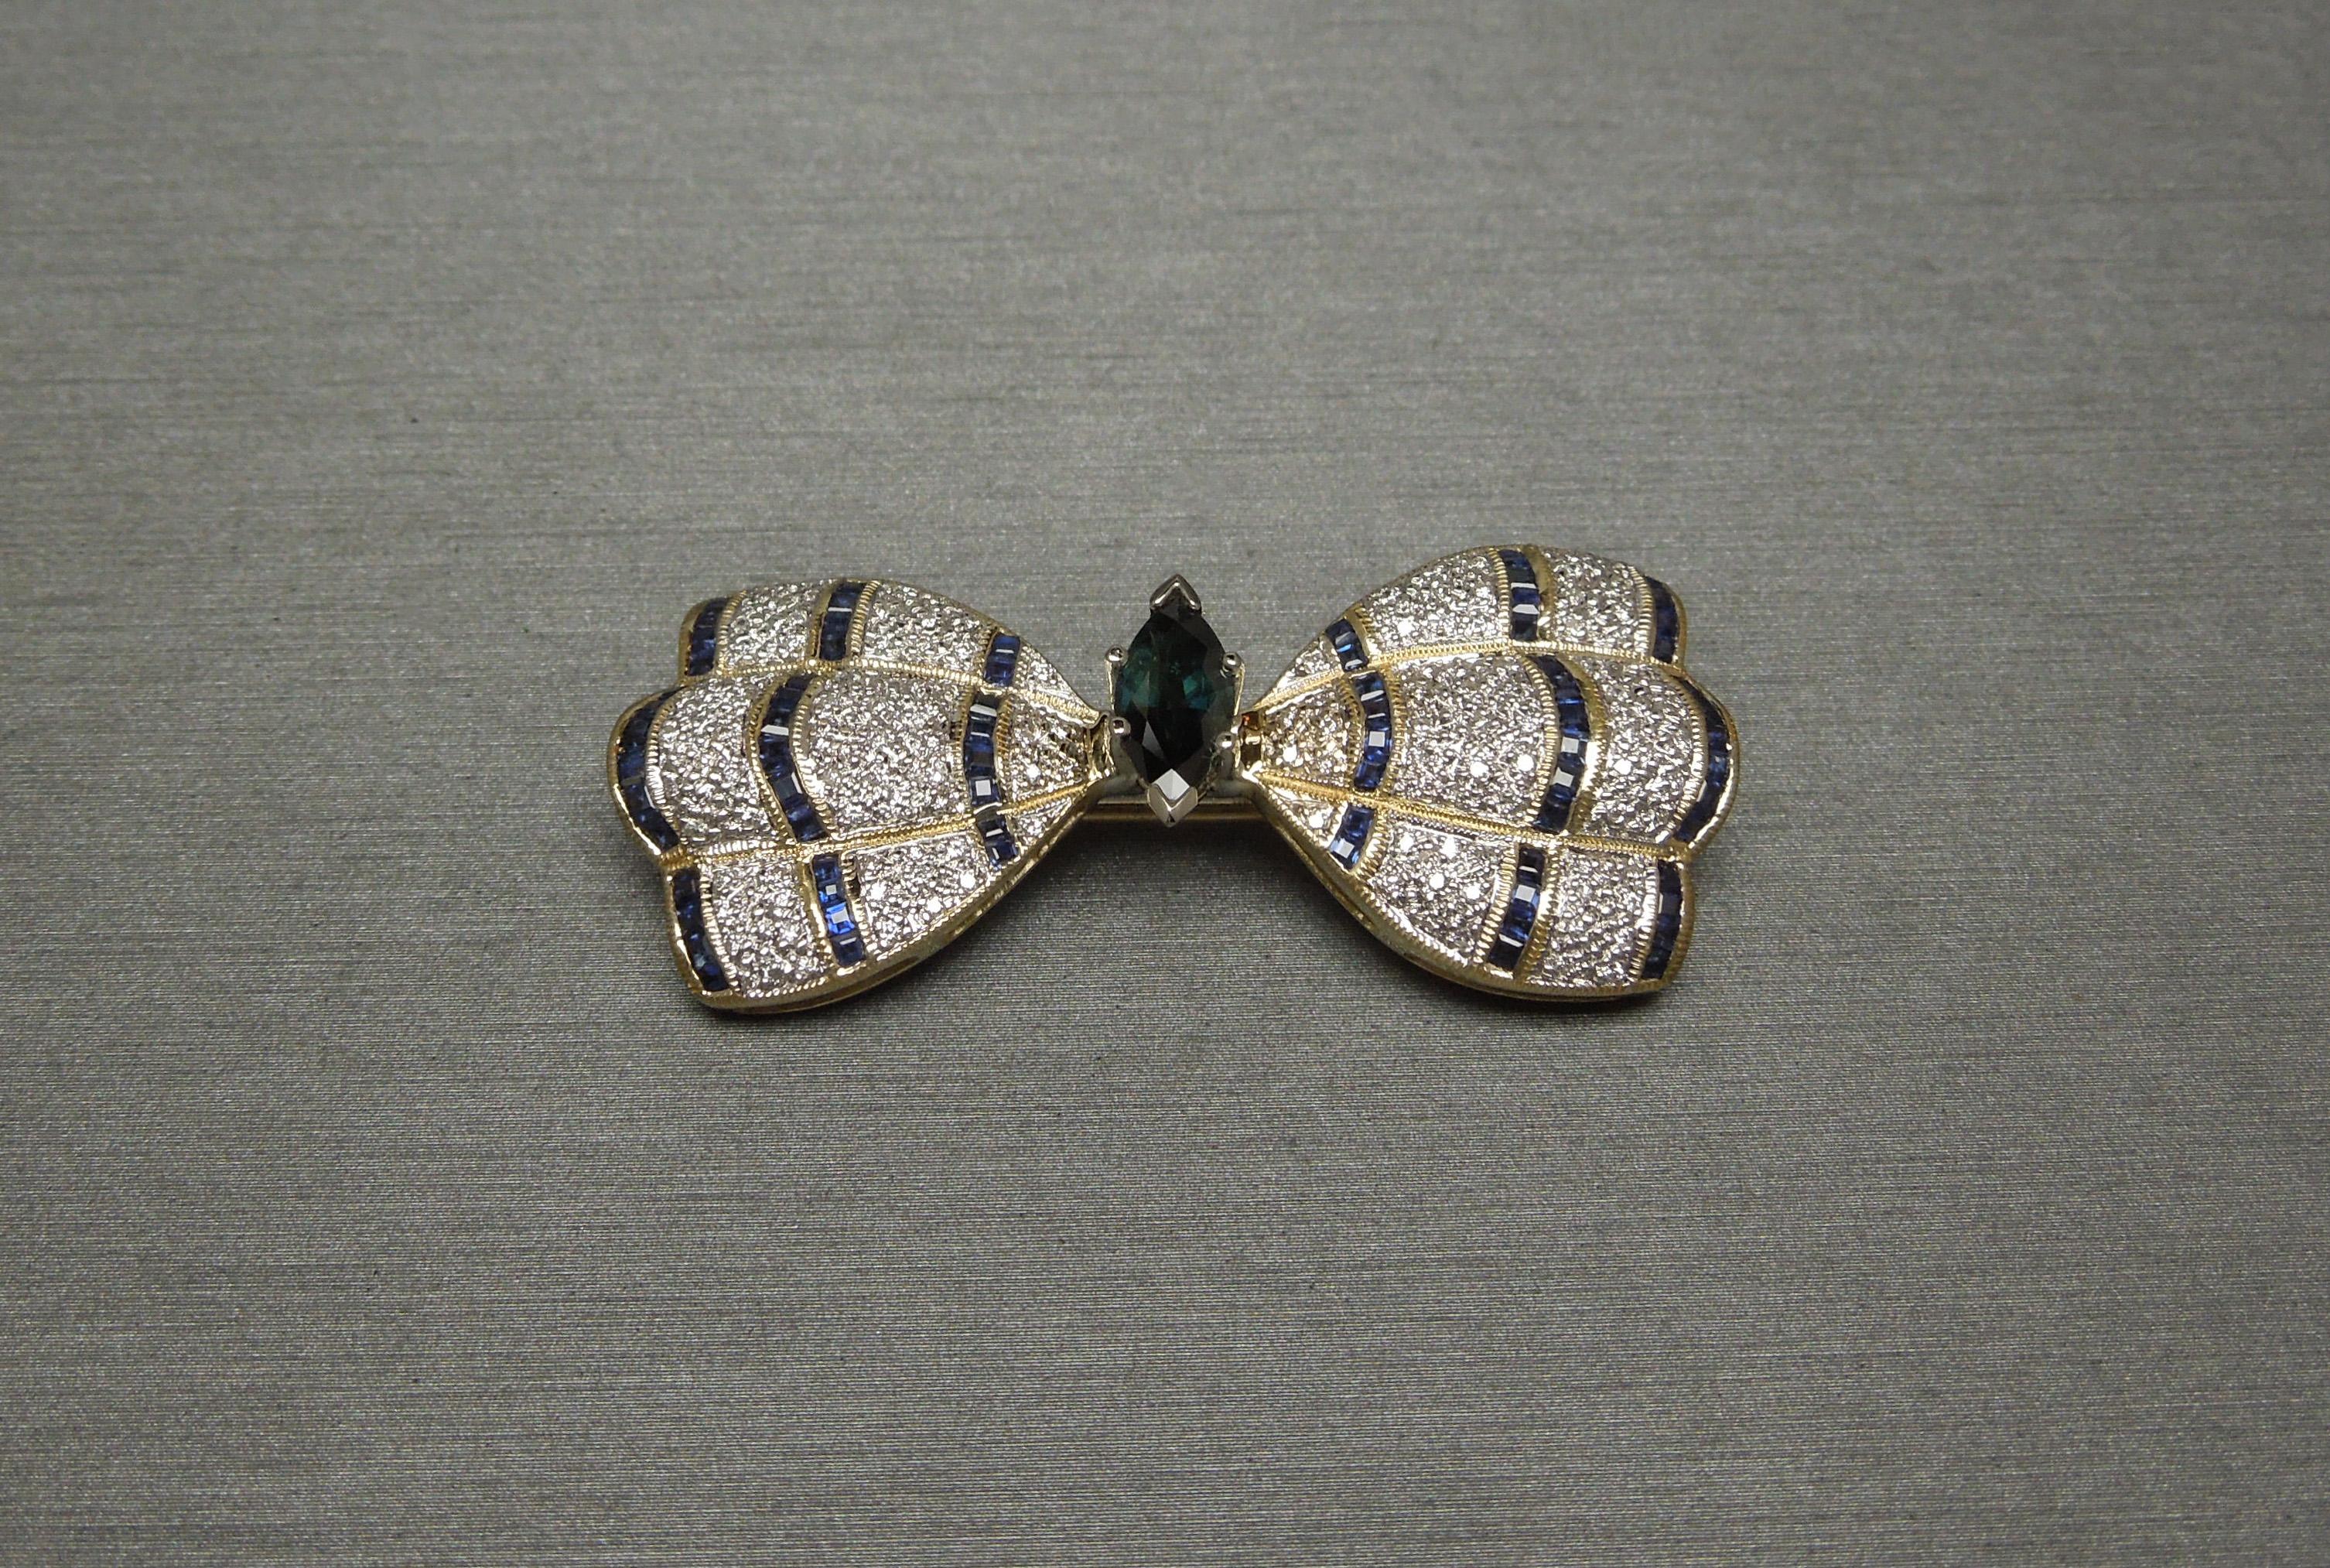 This 18 Karat Gold Sapphire & Diamond Butterfly features a central 1.20 carat Marquise cut Natural Color Changing [Blue-Green] Sapphire, resembling the body of Butterfly, at 10mm in length x 4.7mm in width, securely set in a 6-Prong White Gold head